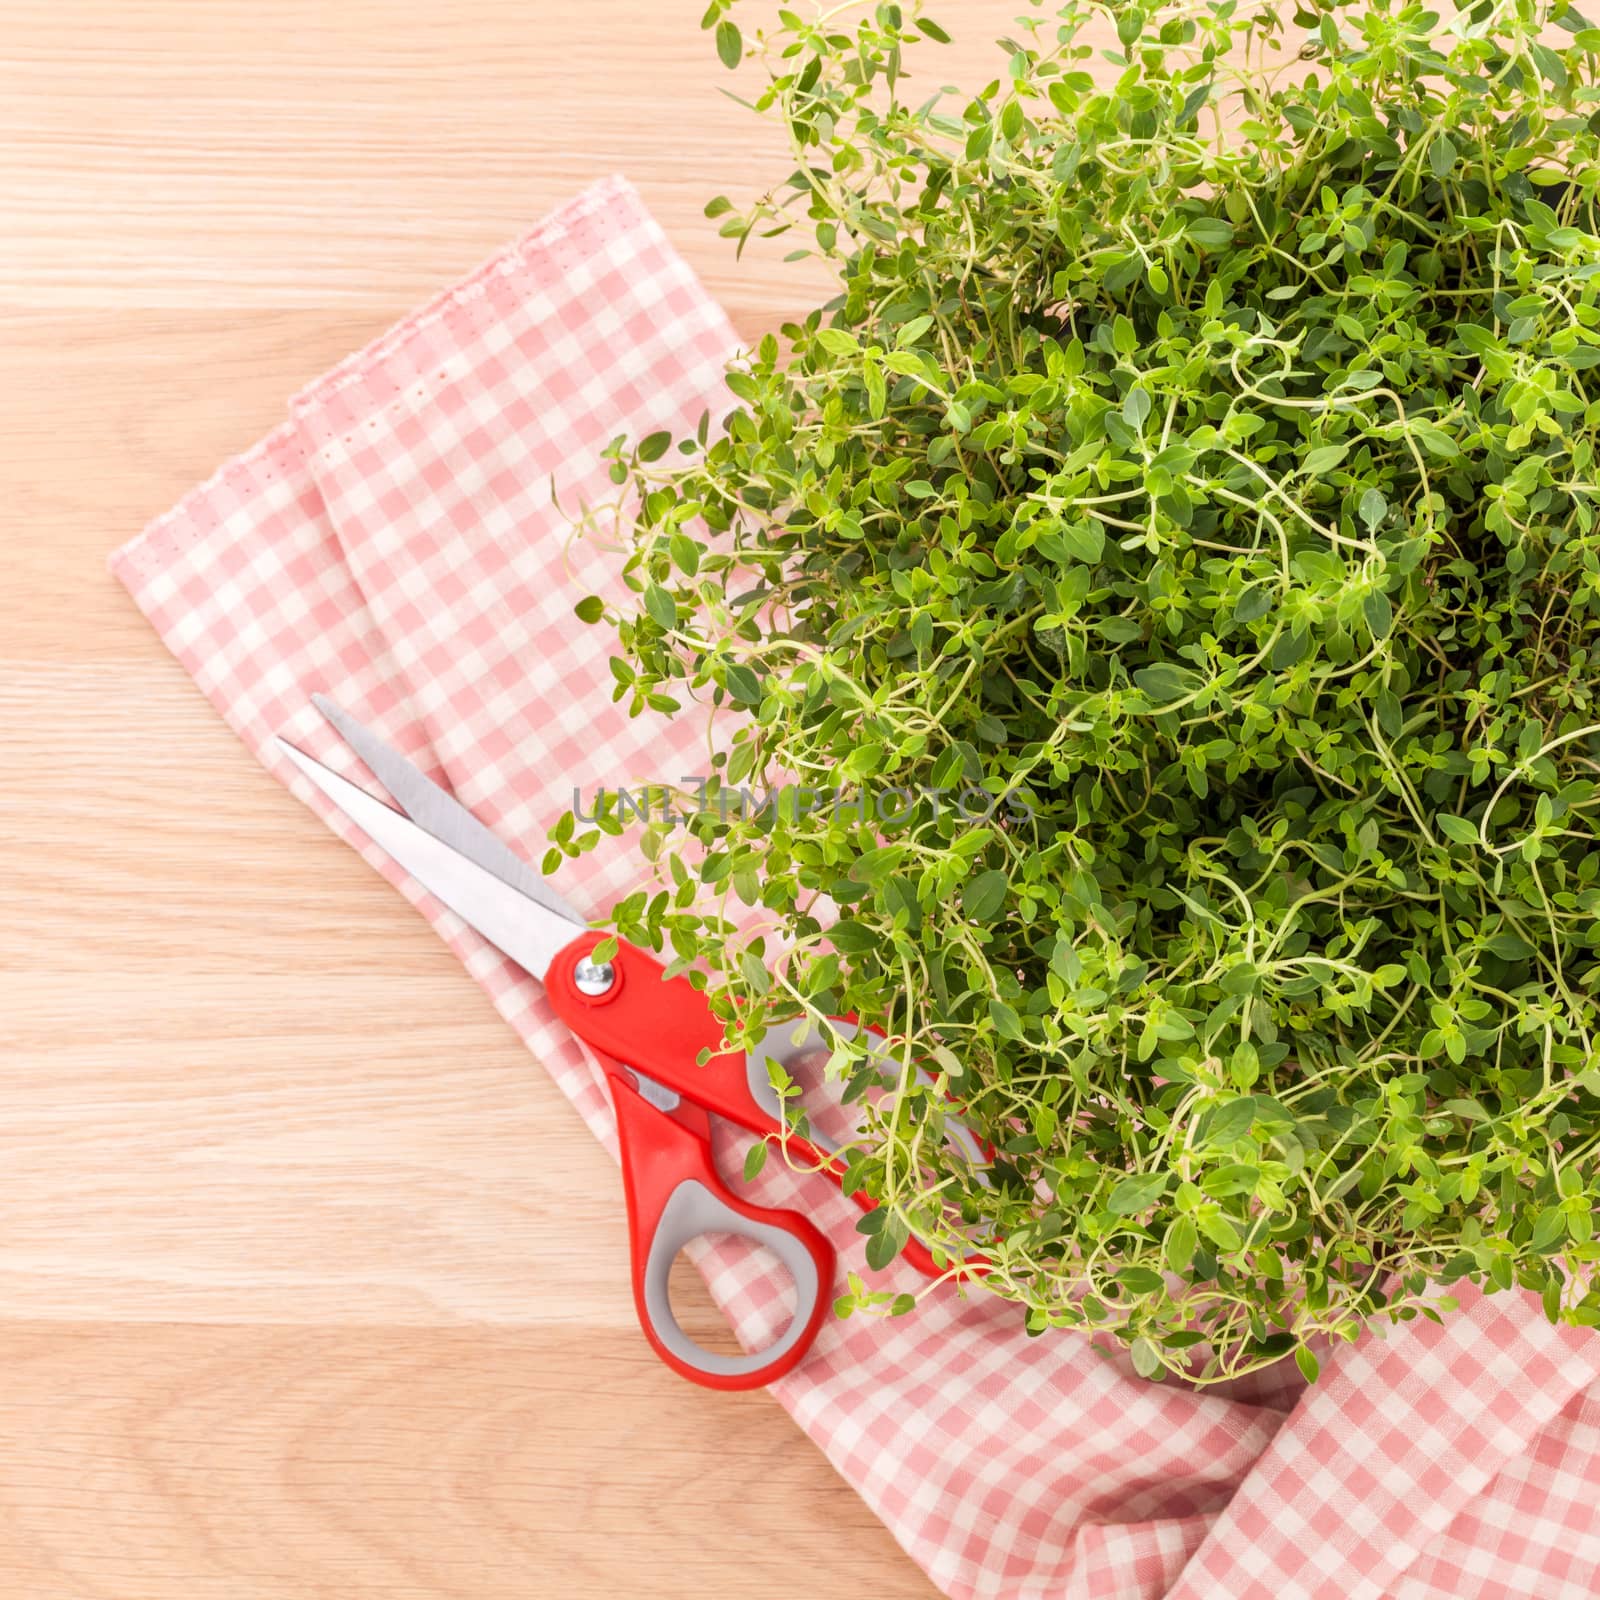 Alternative mediterranean medicinal plants lemon thyme for medicinal and culinary use on wooden background.